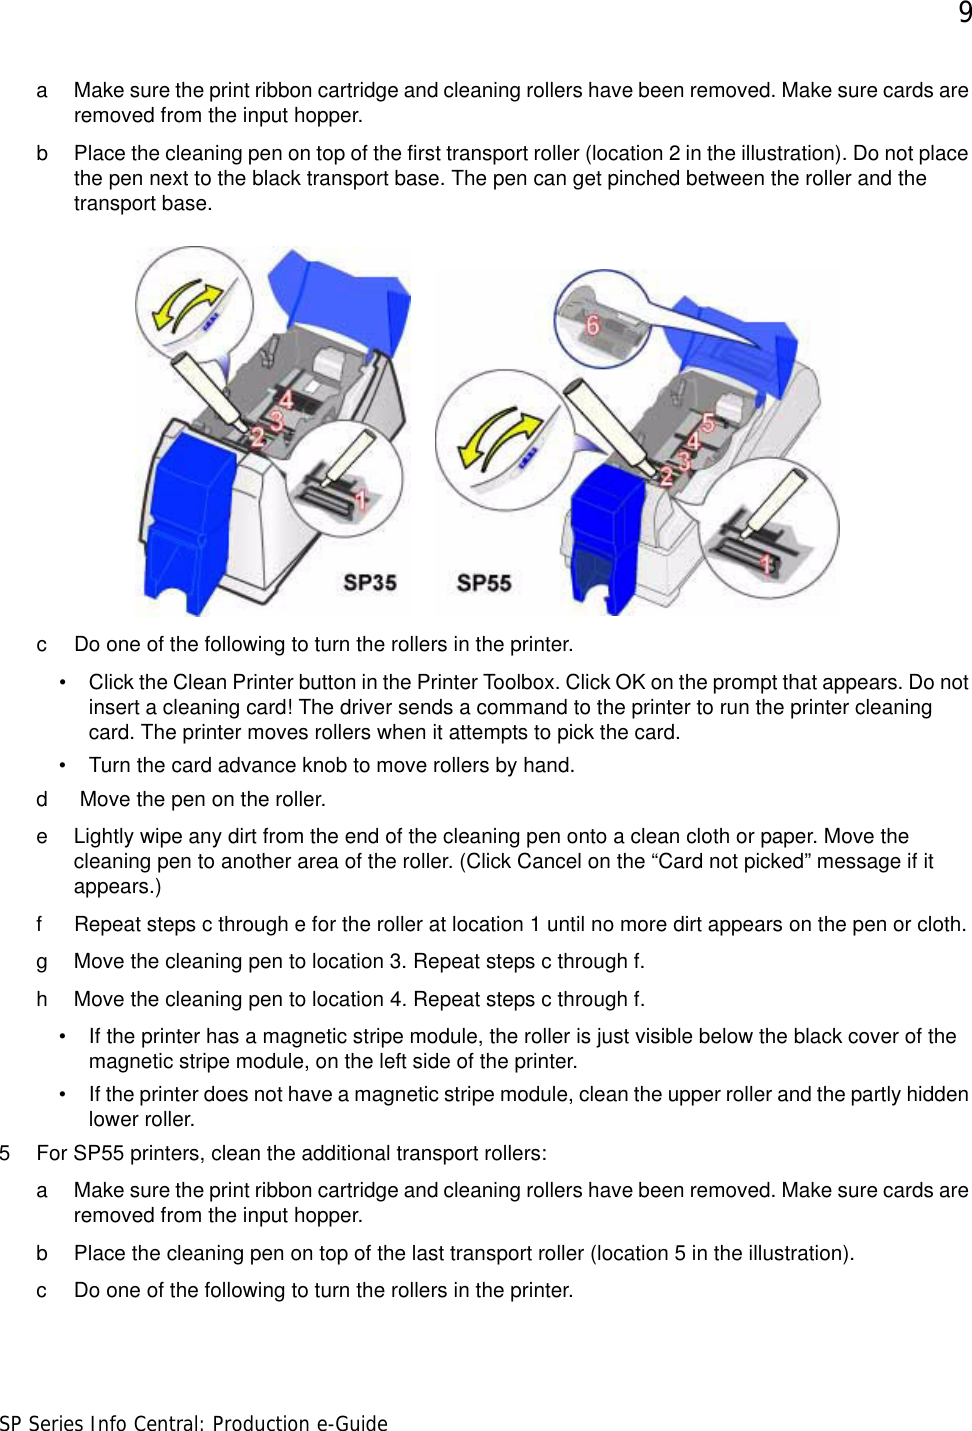 9SP Series Info Central: Production e-Guidea Make sure the print ribbon cartridge and cleaning rollers have been removed. Make sure cards are removed from the input hopper.b Place the cleaning pen on top of the first transport roller (location 2 in the illustration). Do not place the pen next to the black transport base. The pen can get pinched between the roller and the transport base.c Do one of the following to turn the rollers in the printer. • Click the Clean Printer button in the Printer Toolbox. Click OK on the prompt that appears. Do not insert a cleaning card! The driver sends a command to the printer to run the printer cleaning card. The printer moves rollers when it attempts to pick the card.• Turn the card advance knob to move rollers by hand.d  Move the pen on the roller.e Lightly wipe any dirt from the end of the cleaning pen onto a clean cloth or paper. Move the cleaning pen to another area of the roller. (Click Cancel on the “Card not picked” message if it appears.)f Repeat steps c through e for the roller at location 1 until no more dirt appears on the pen or cloth.g Move the cleaning pen to location 3. Repeat steps c through f. h Move the cleaning pen to location 4. Repeat steps c through f.• If the printer has a magnetic stripe module, the roller is just visible below the black cover of the magnetic stripe module, on the left side of the printer. • If the printer does not have a magnetic stripe module, clean the upper roller and the partly hidden lower roller.5 For SP55 printers, clean the additional transport rollers:a Make sure the print ribbon cartridge and cleaning rollers have been removed. Make sure cards are removed from the input hopper.b Place the cleaning pen on top of the last transport roller (location 5 in the illustration). c Do one of the following to turn the rollers in the printer. 